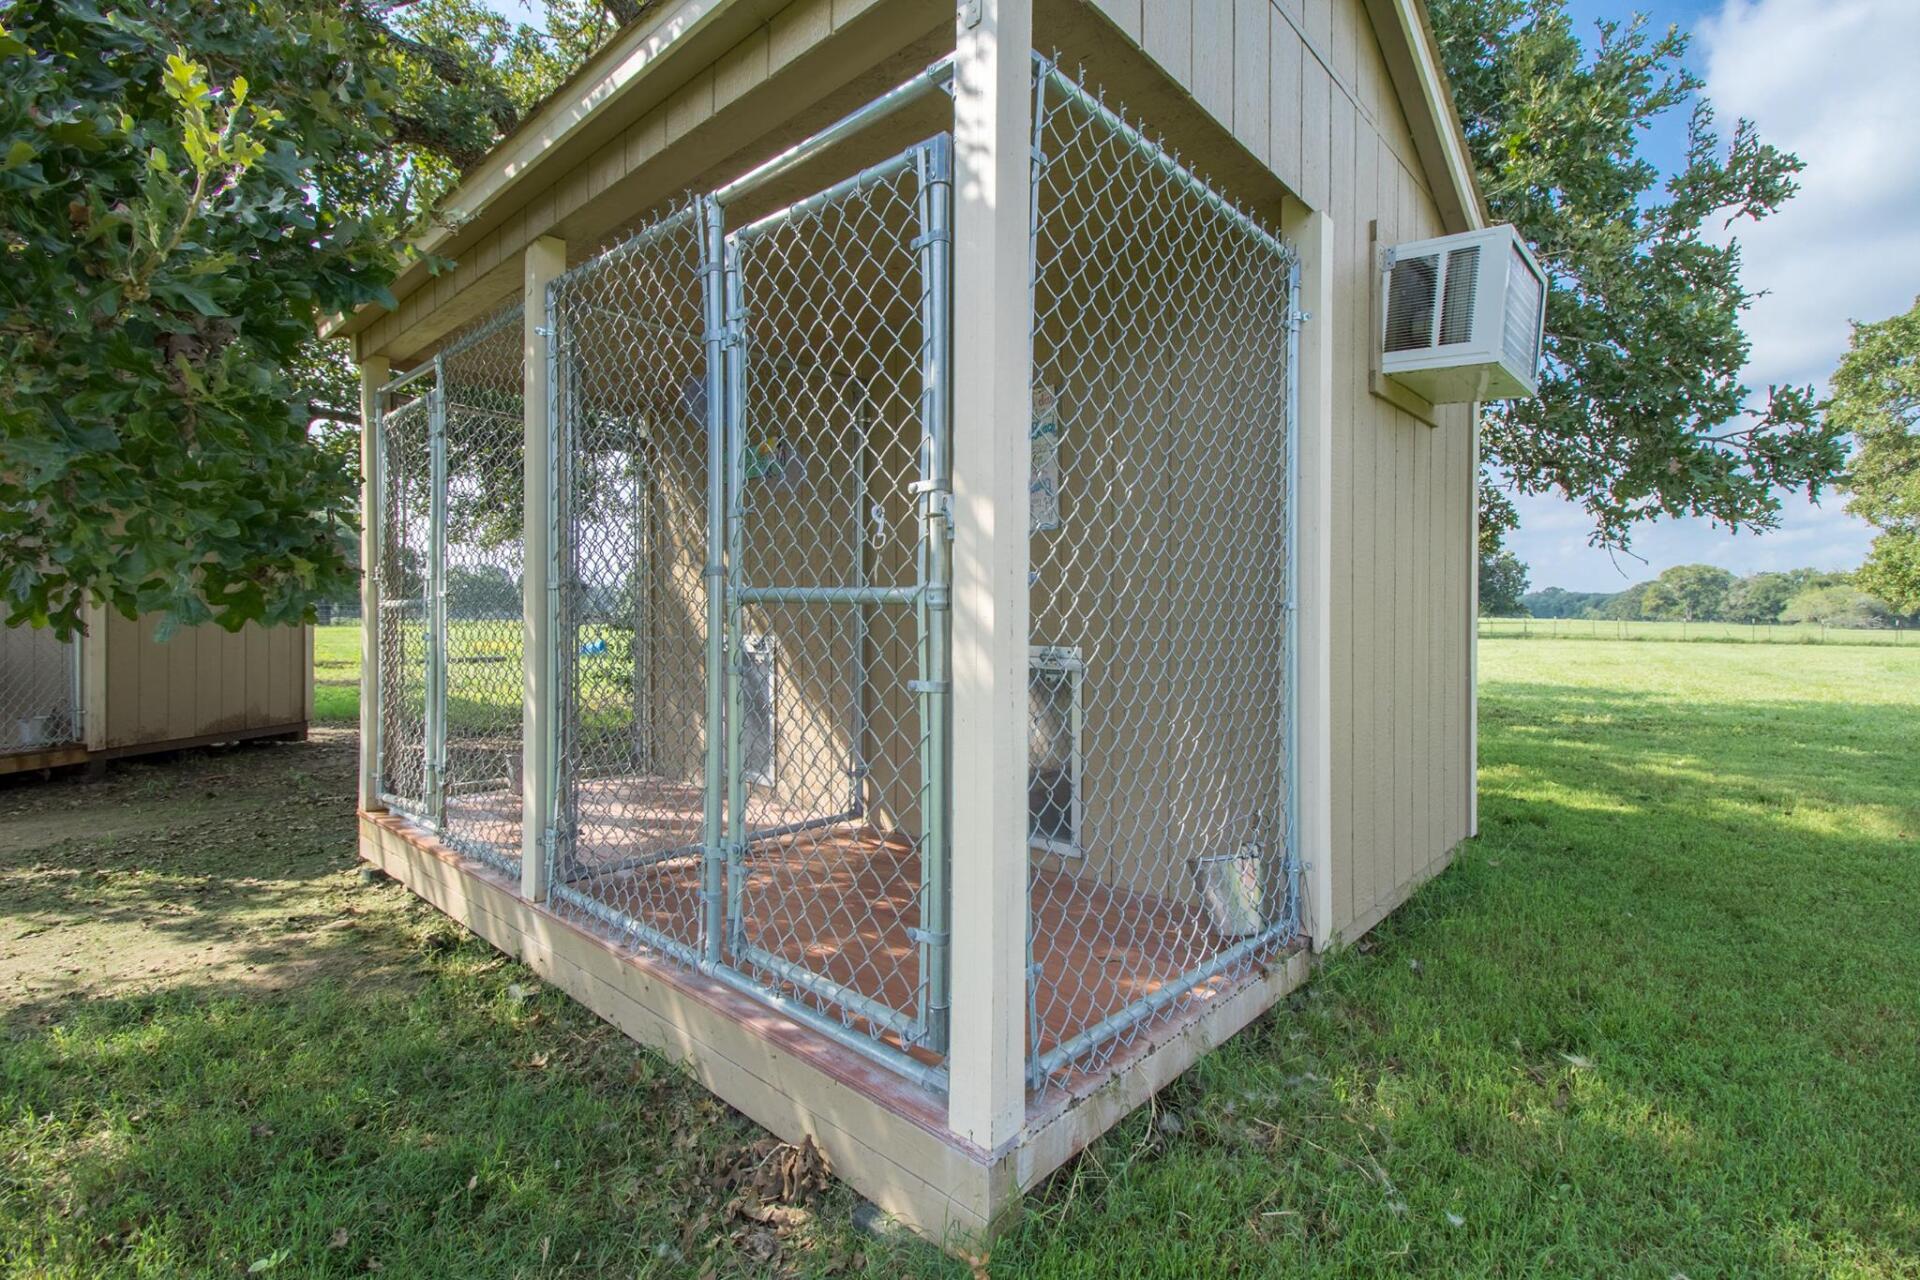 Outdoor dog kennels outside a building. - Bastrop, TX - K9 Mastery